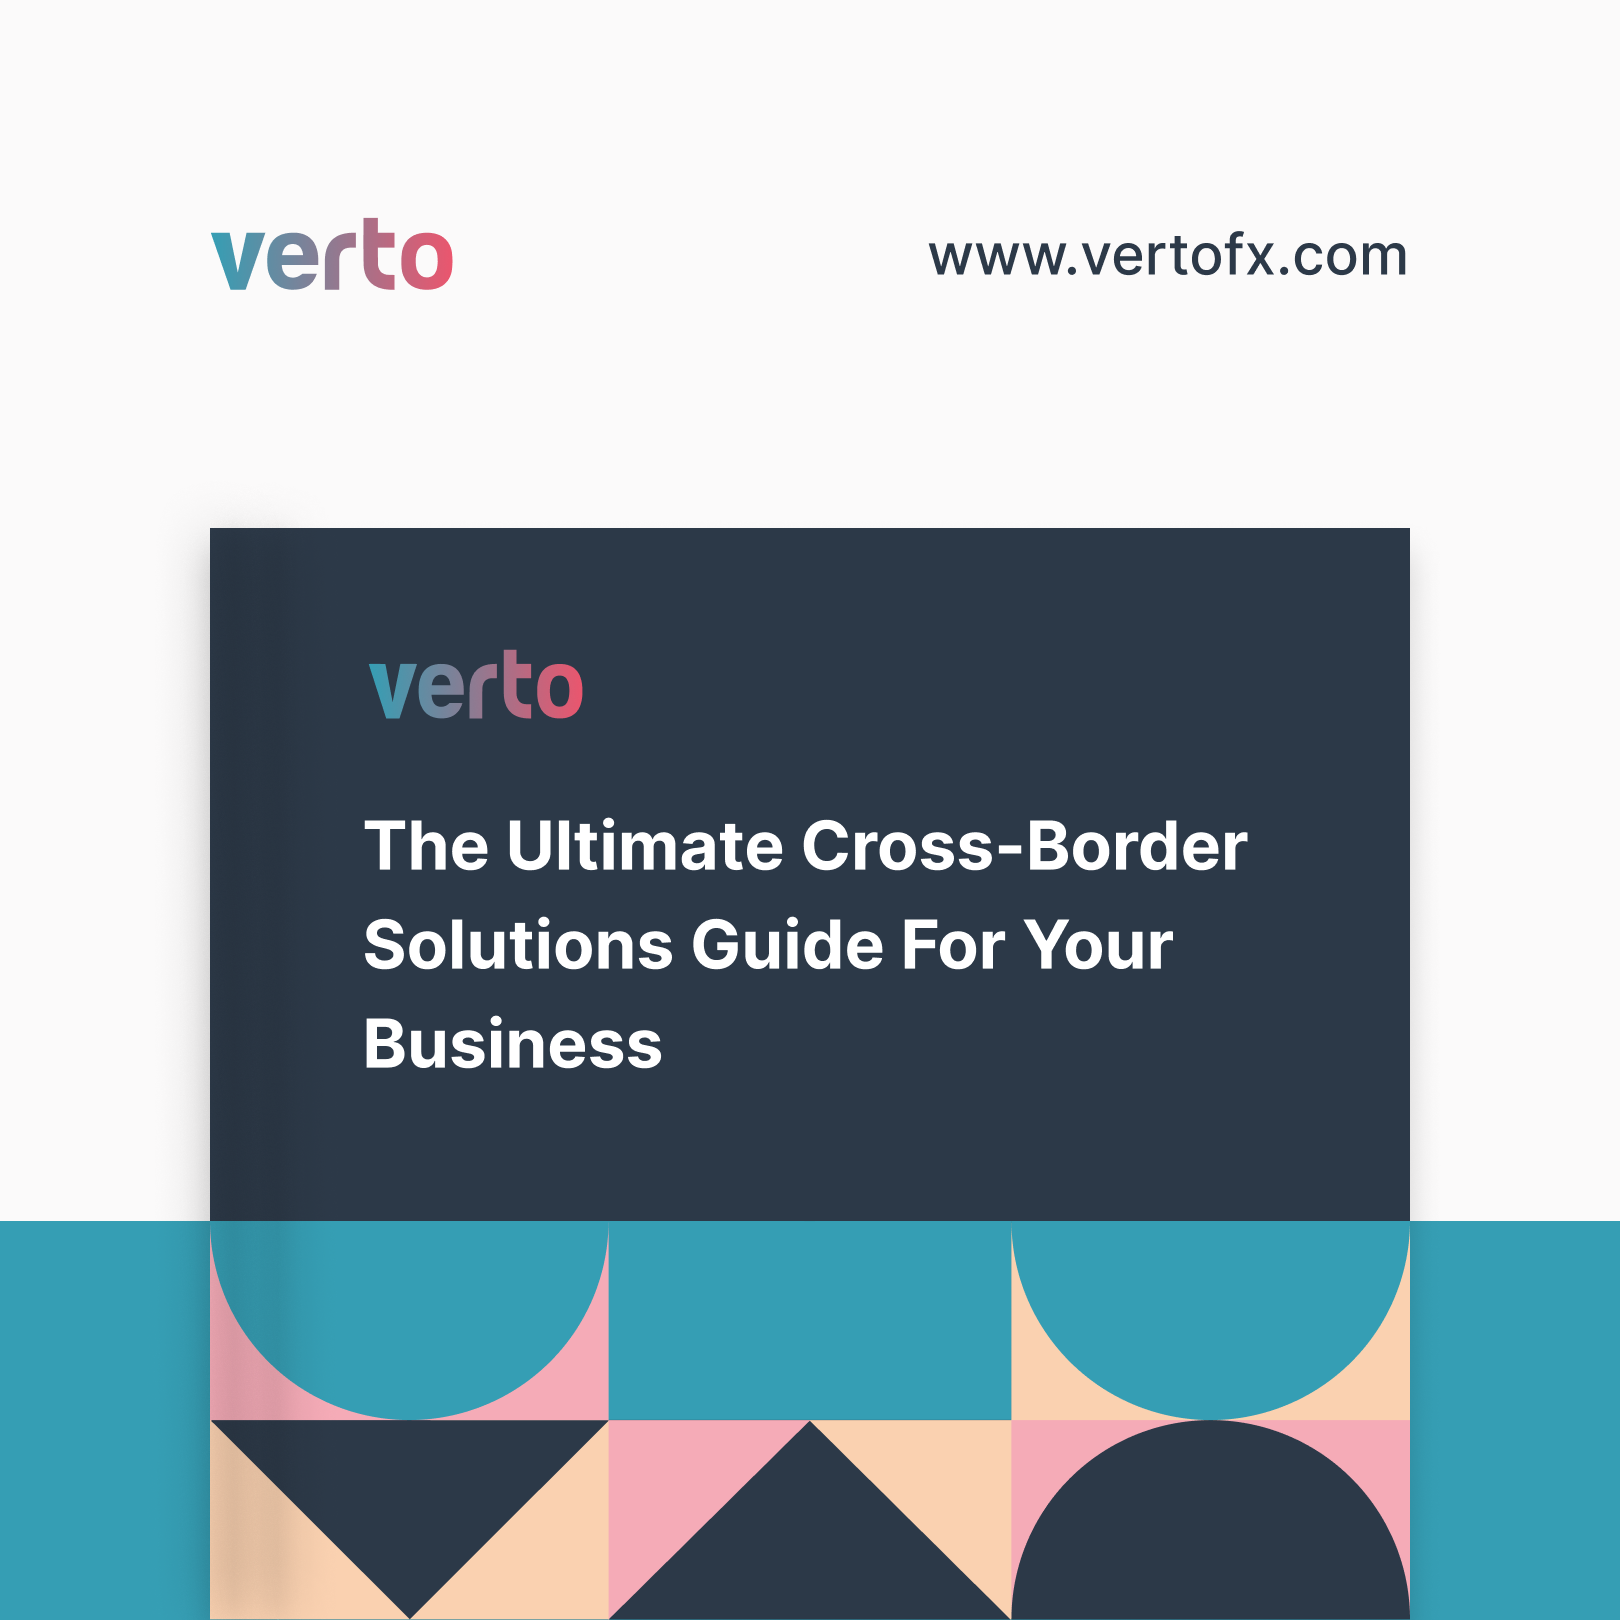 The Ultimate Cross-Border Solutions Guide For Your Business